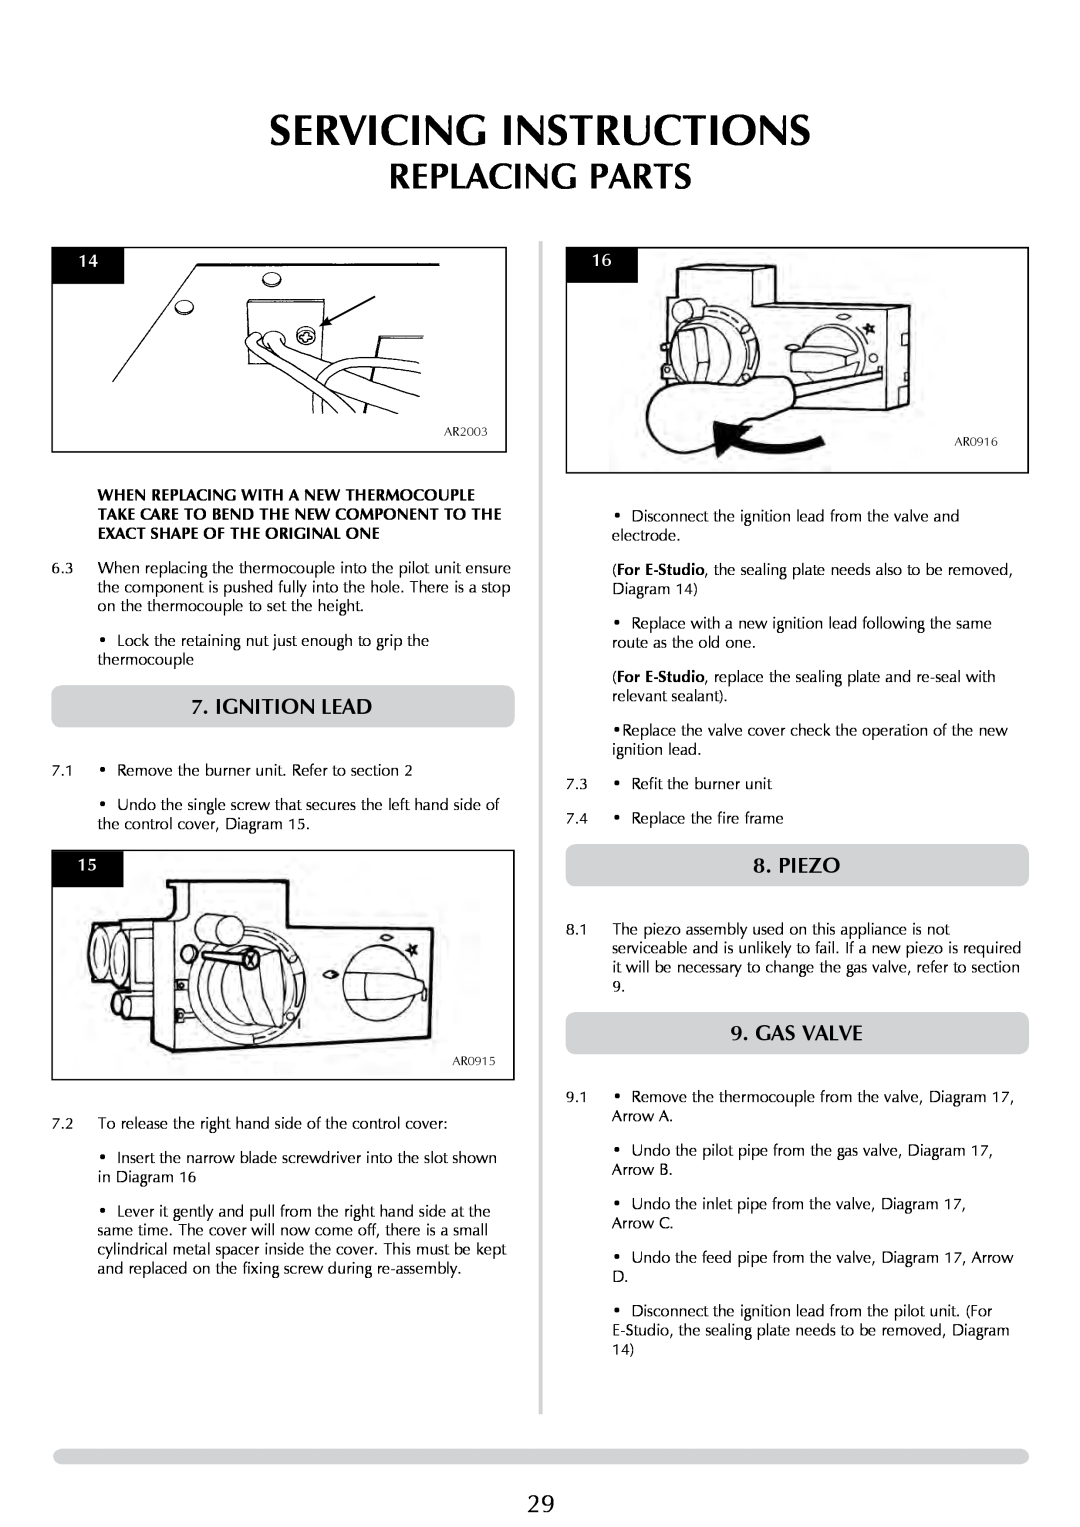 Stovax PR0776 manual IGNITION LEad, piezo, gas valve, Servicing Instructions, Replacing Parts 